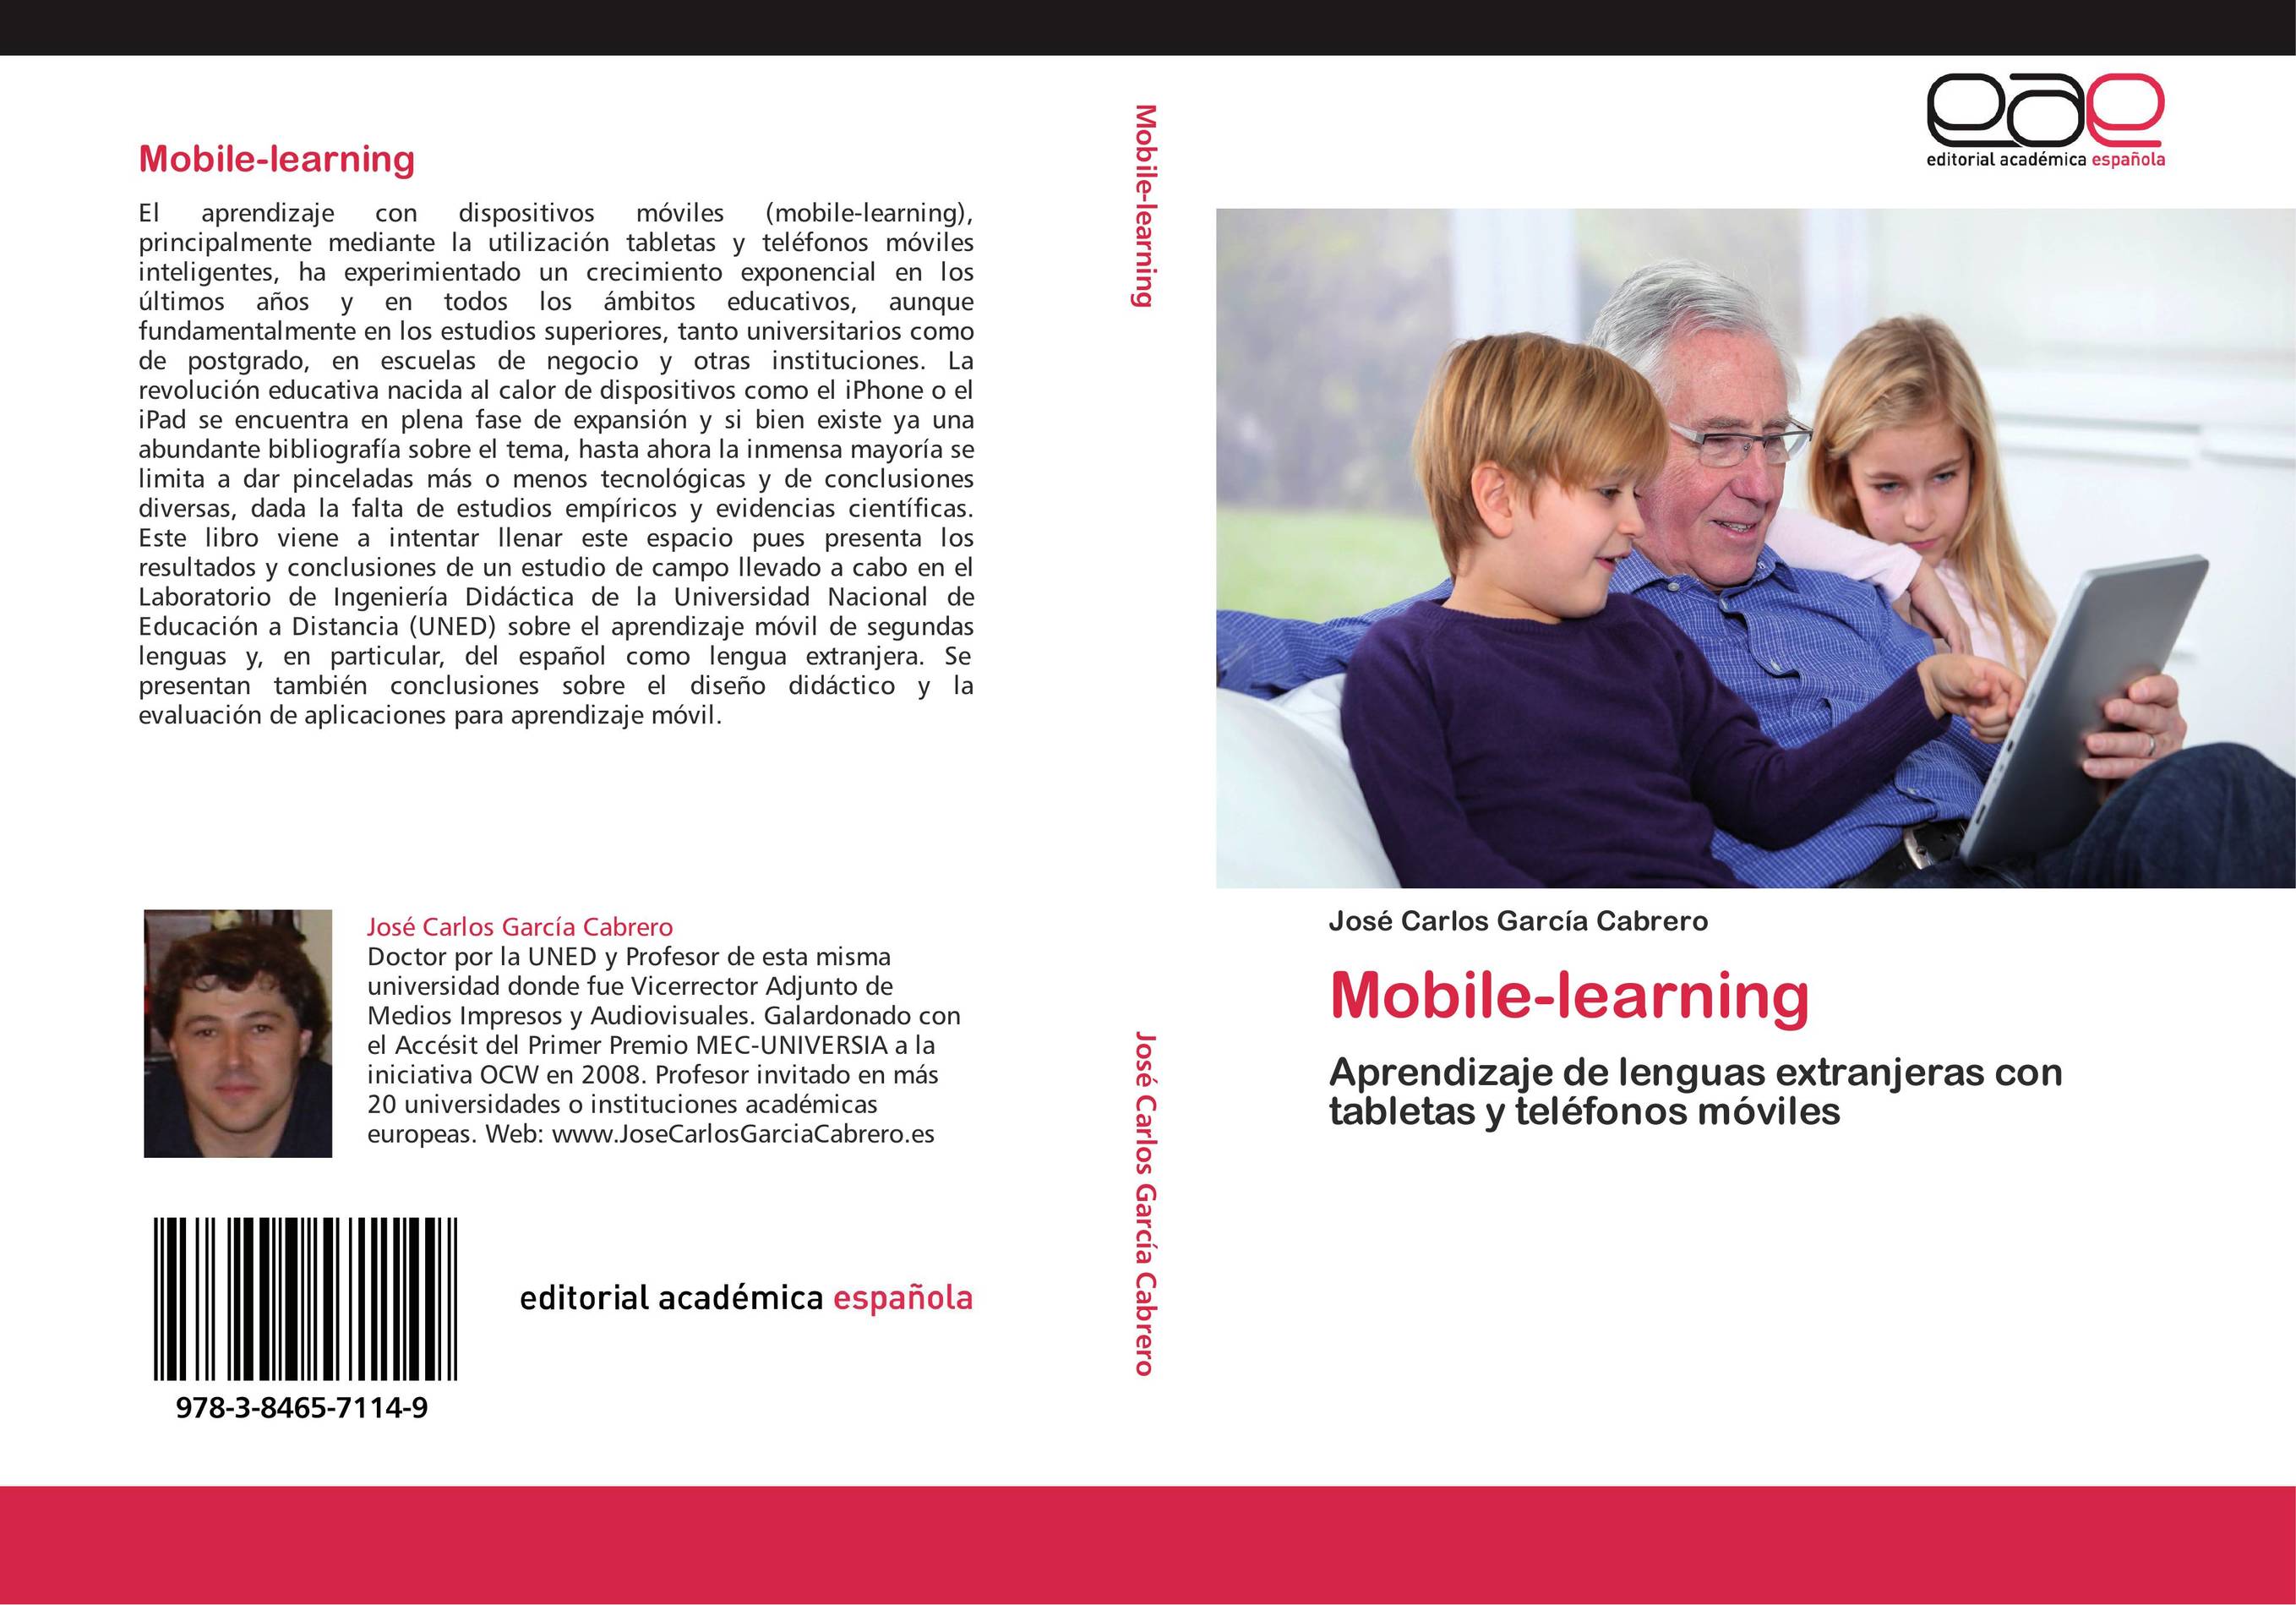 Mobile-learning